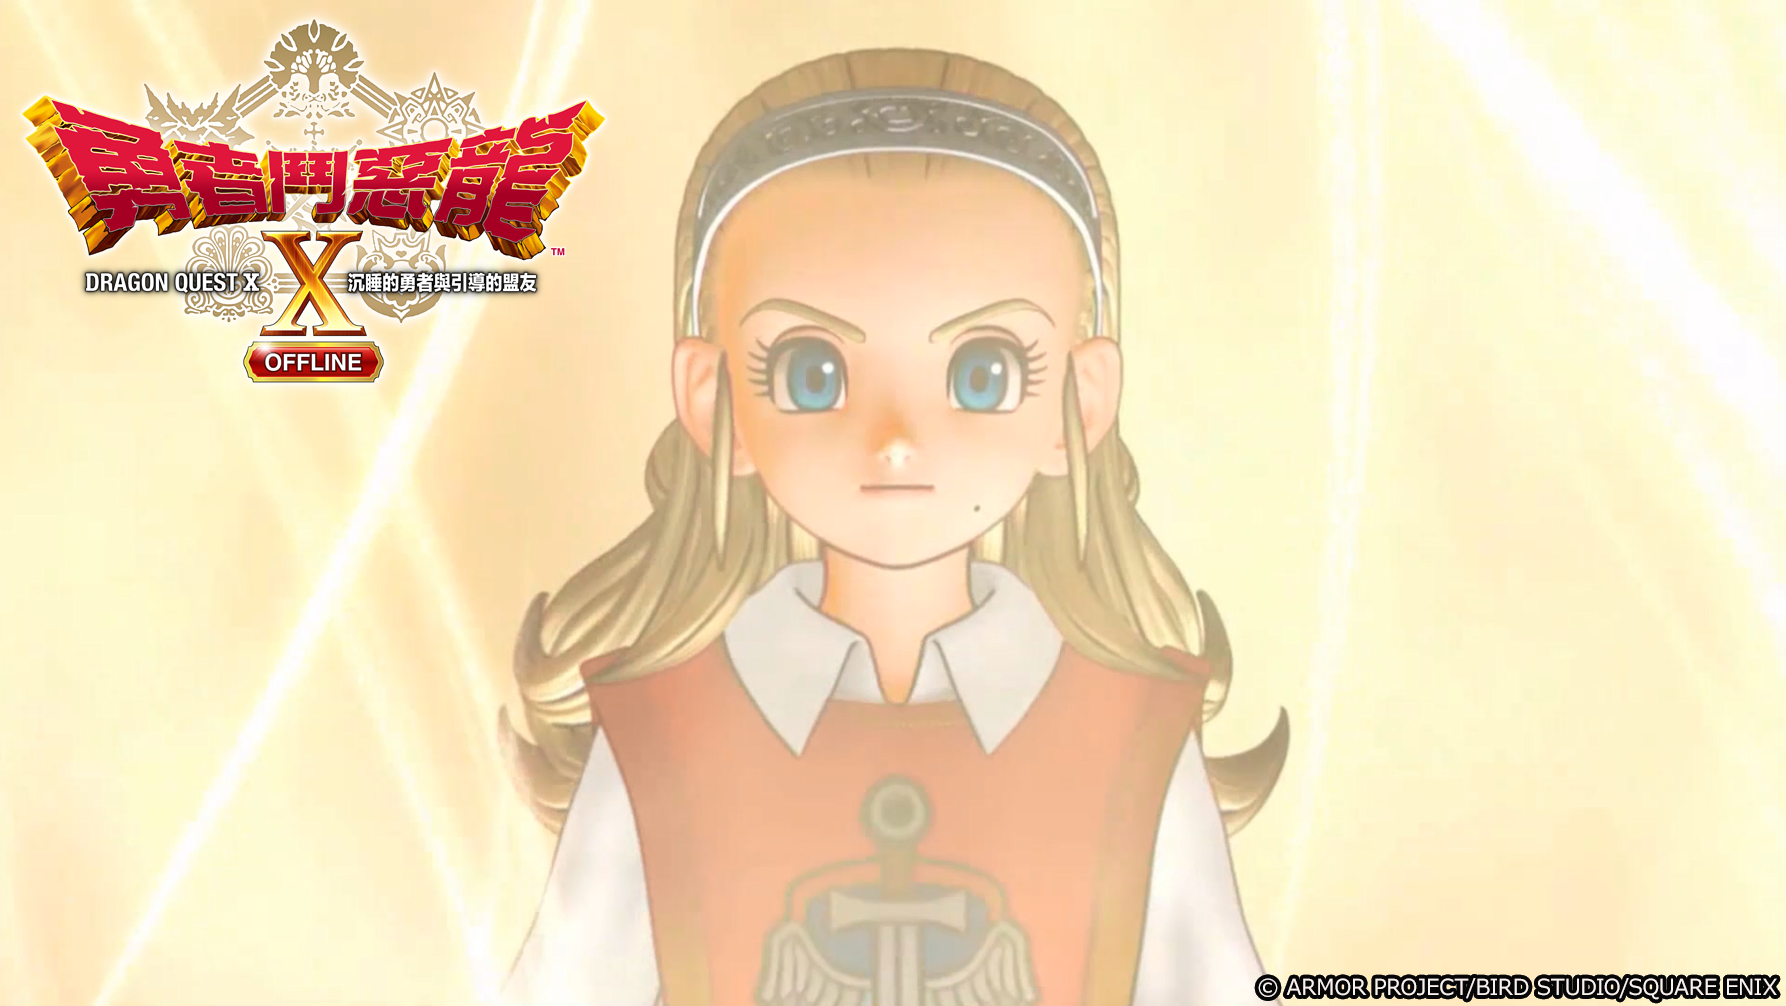 DRAGON QUEST X OFFLINE Chinese/Korean DLC Announcement Trailer/ *This title is not available in English